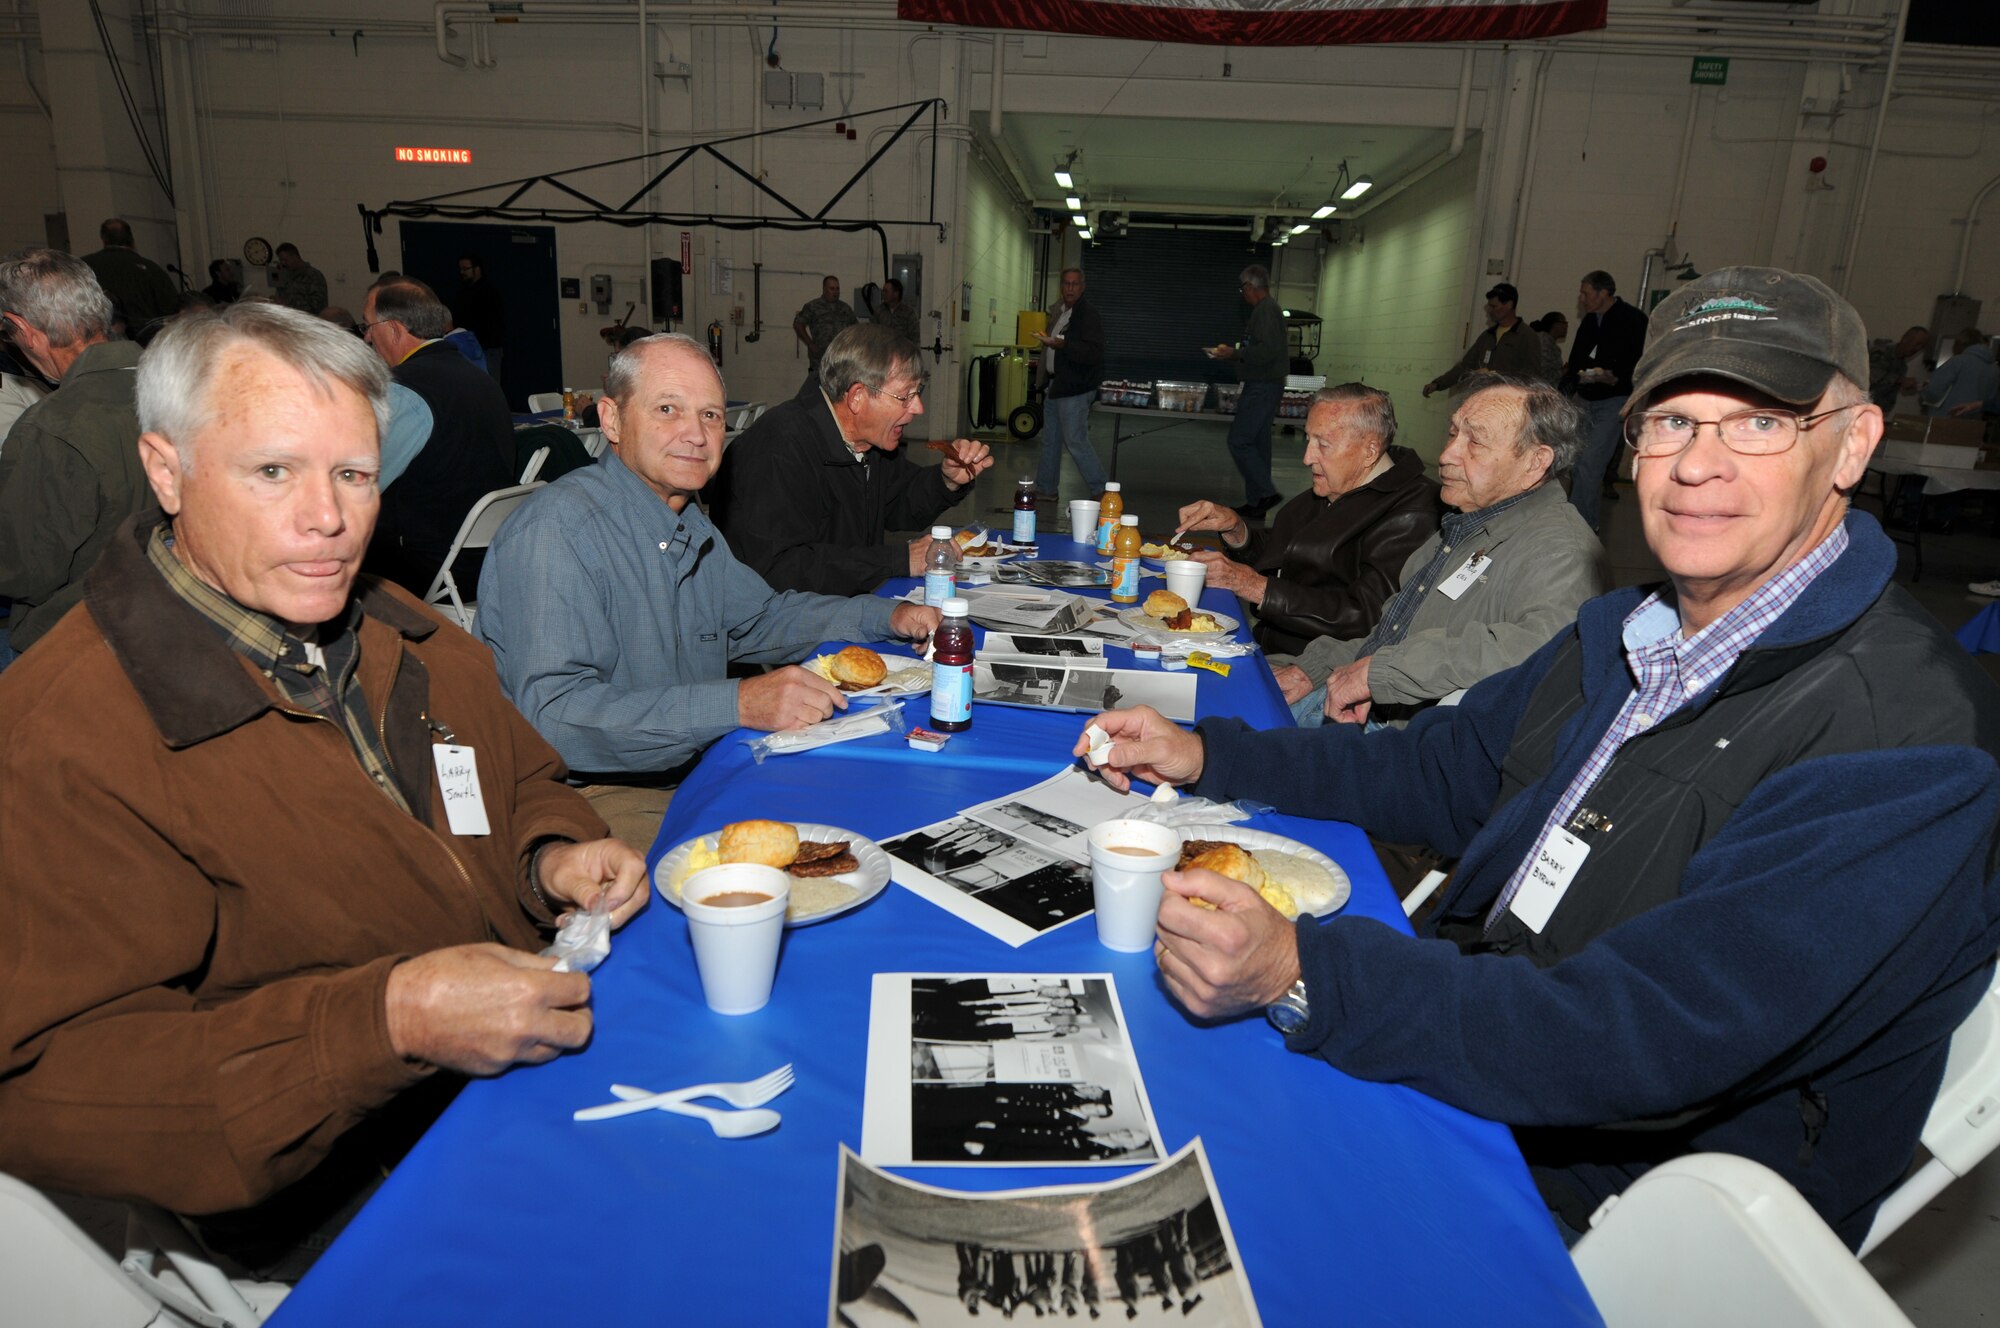 Retired Chief Master Sgt. William (Bill) Fish, (seated in back on the right) now 92, a former member of the 145th Aircraft Maintenance Squadron, joins other comrades, all retirees of the North Carolina Air National Guard, at the 18th Annual Retiree Breakfast held in a hanger at the North Carolina Air National Guard base, Charlotte-Douglas Intl. Airport  October 25, 2013.  Fish was one of five Senior Master Sgt.’s inducted into the Rank of Chief Master Sgt. and remained so for 19 years and 9 months before retiring in December 1980 after joining what is now the 145th Airlift Wing in 1948, a year after the Air Force was established.  (Air National Guard photo by Master Sgt. Patricia F. Moran/Released)